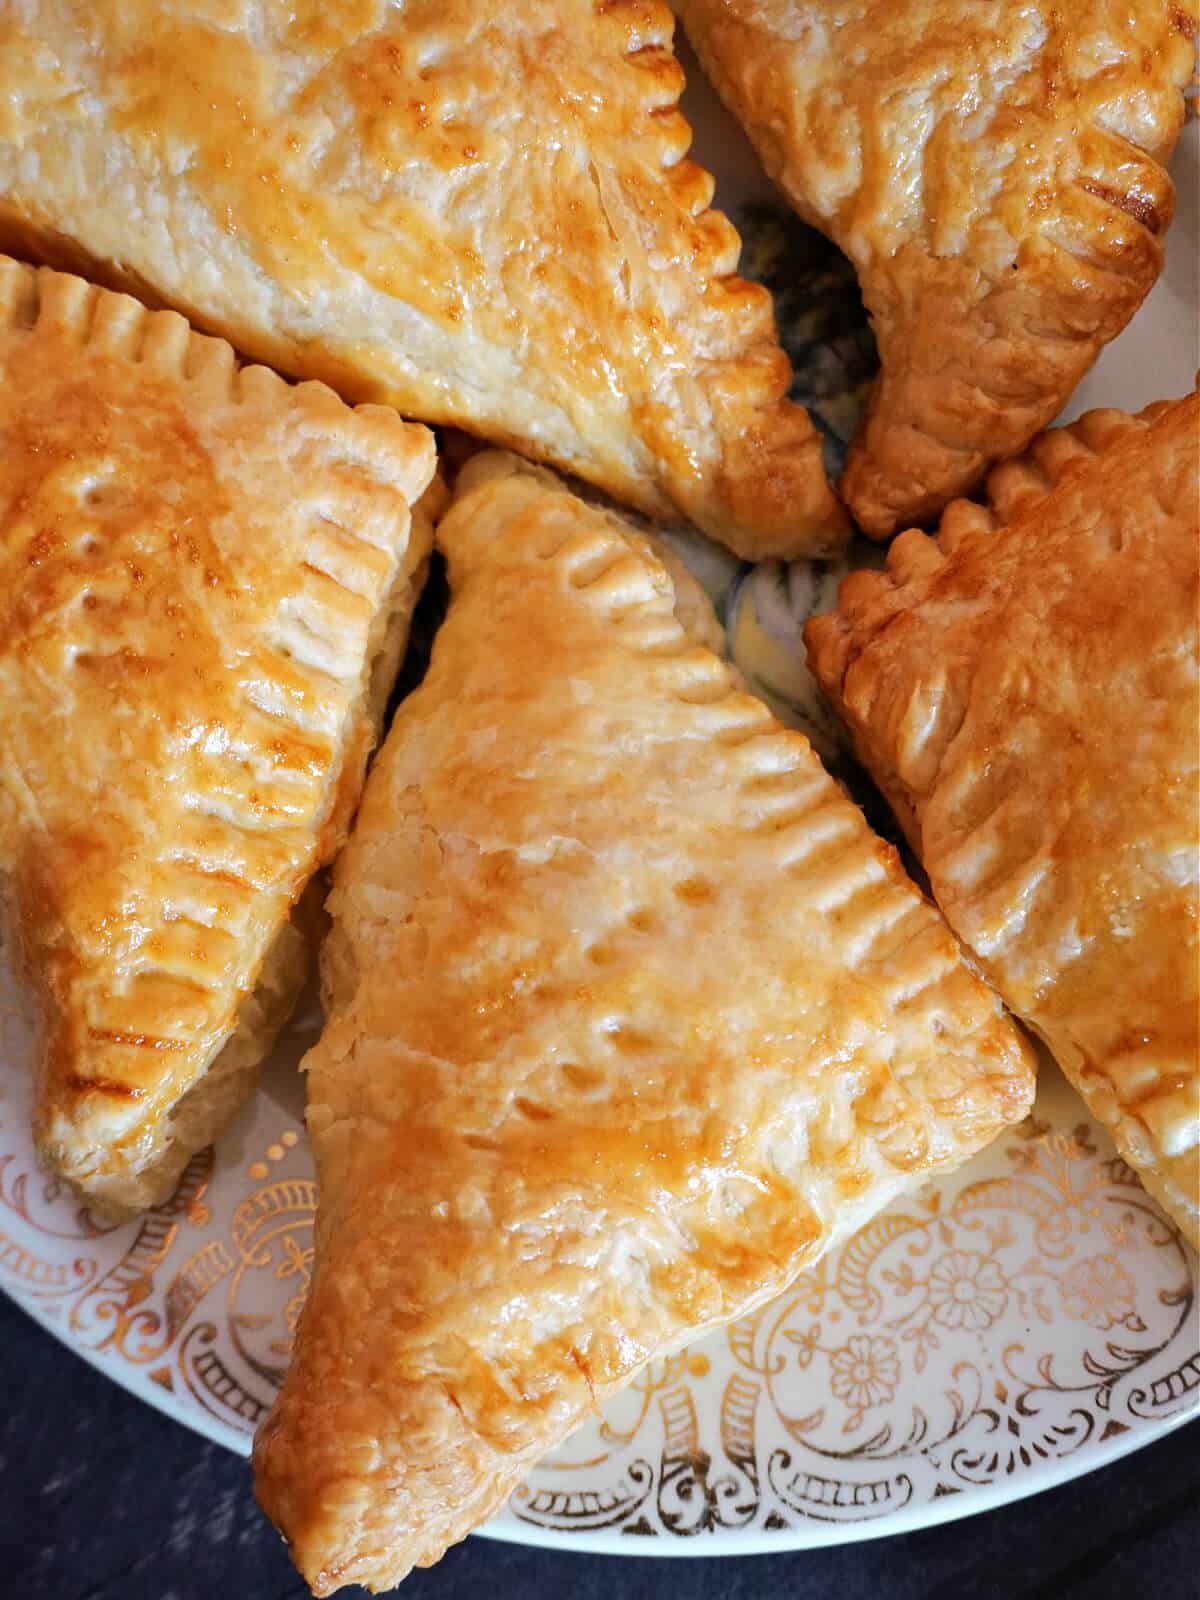 Close-up shot of a pastry triangle with others around it.